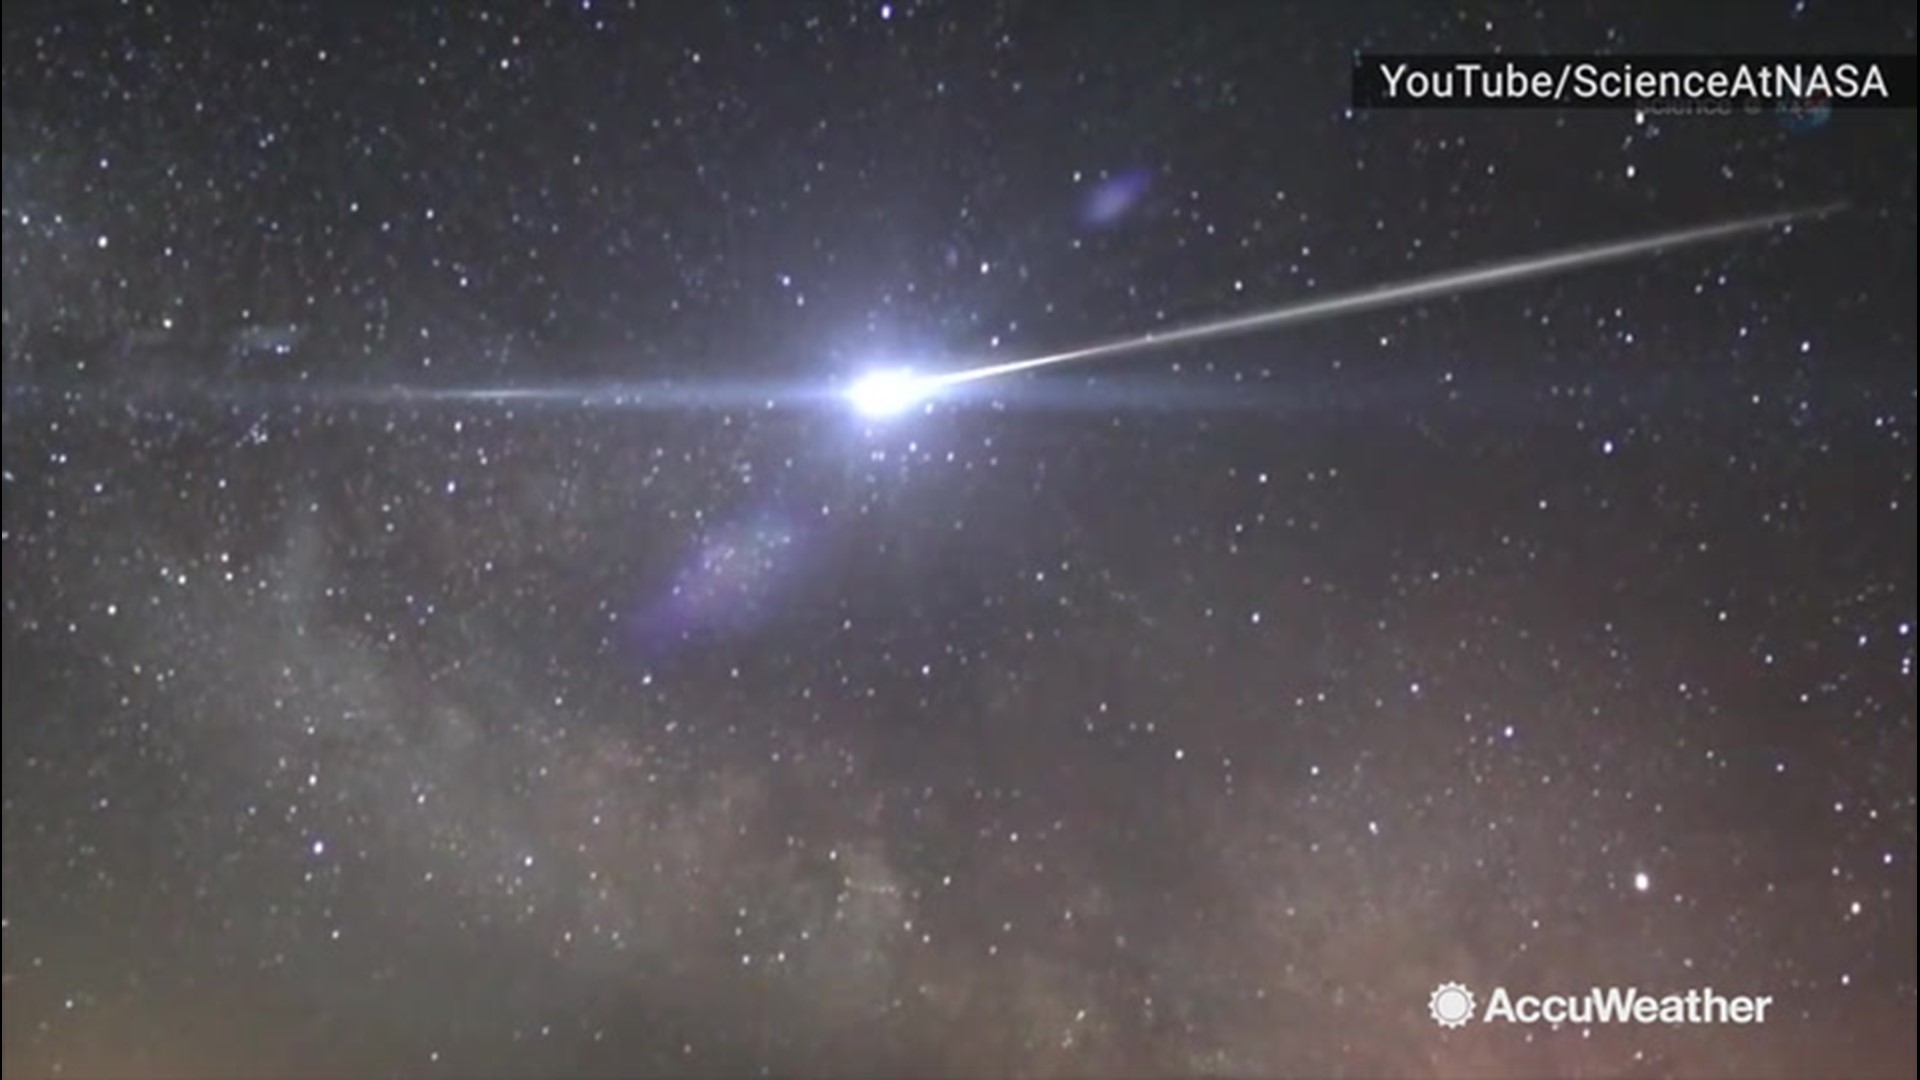 Fall is also the unofficial beginning of meteor shower season. This month kicks off with three meteor showers. Let's find out more about what's up in the sky for the month of October.